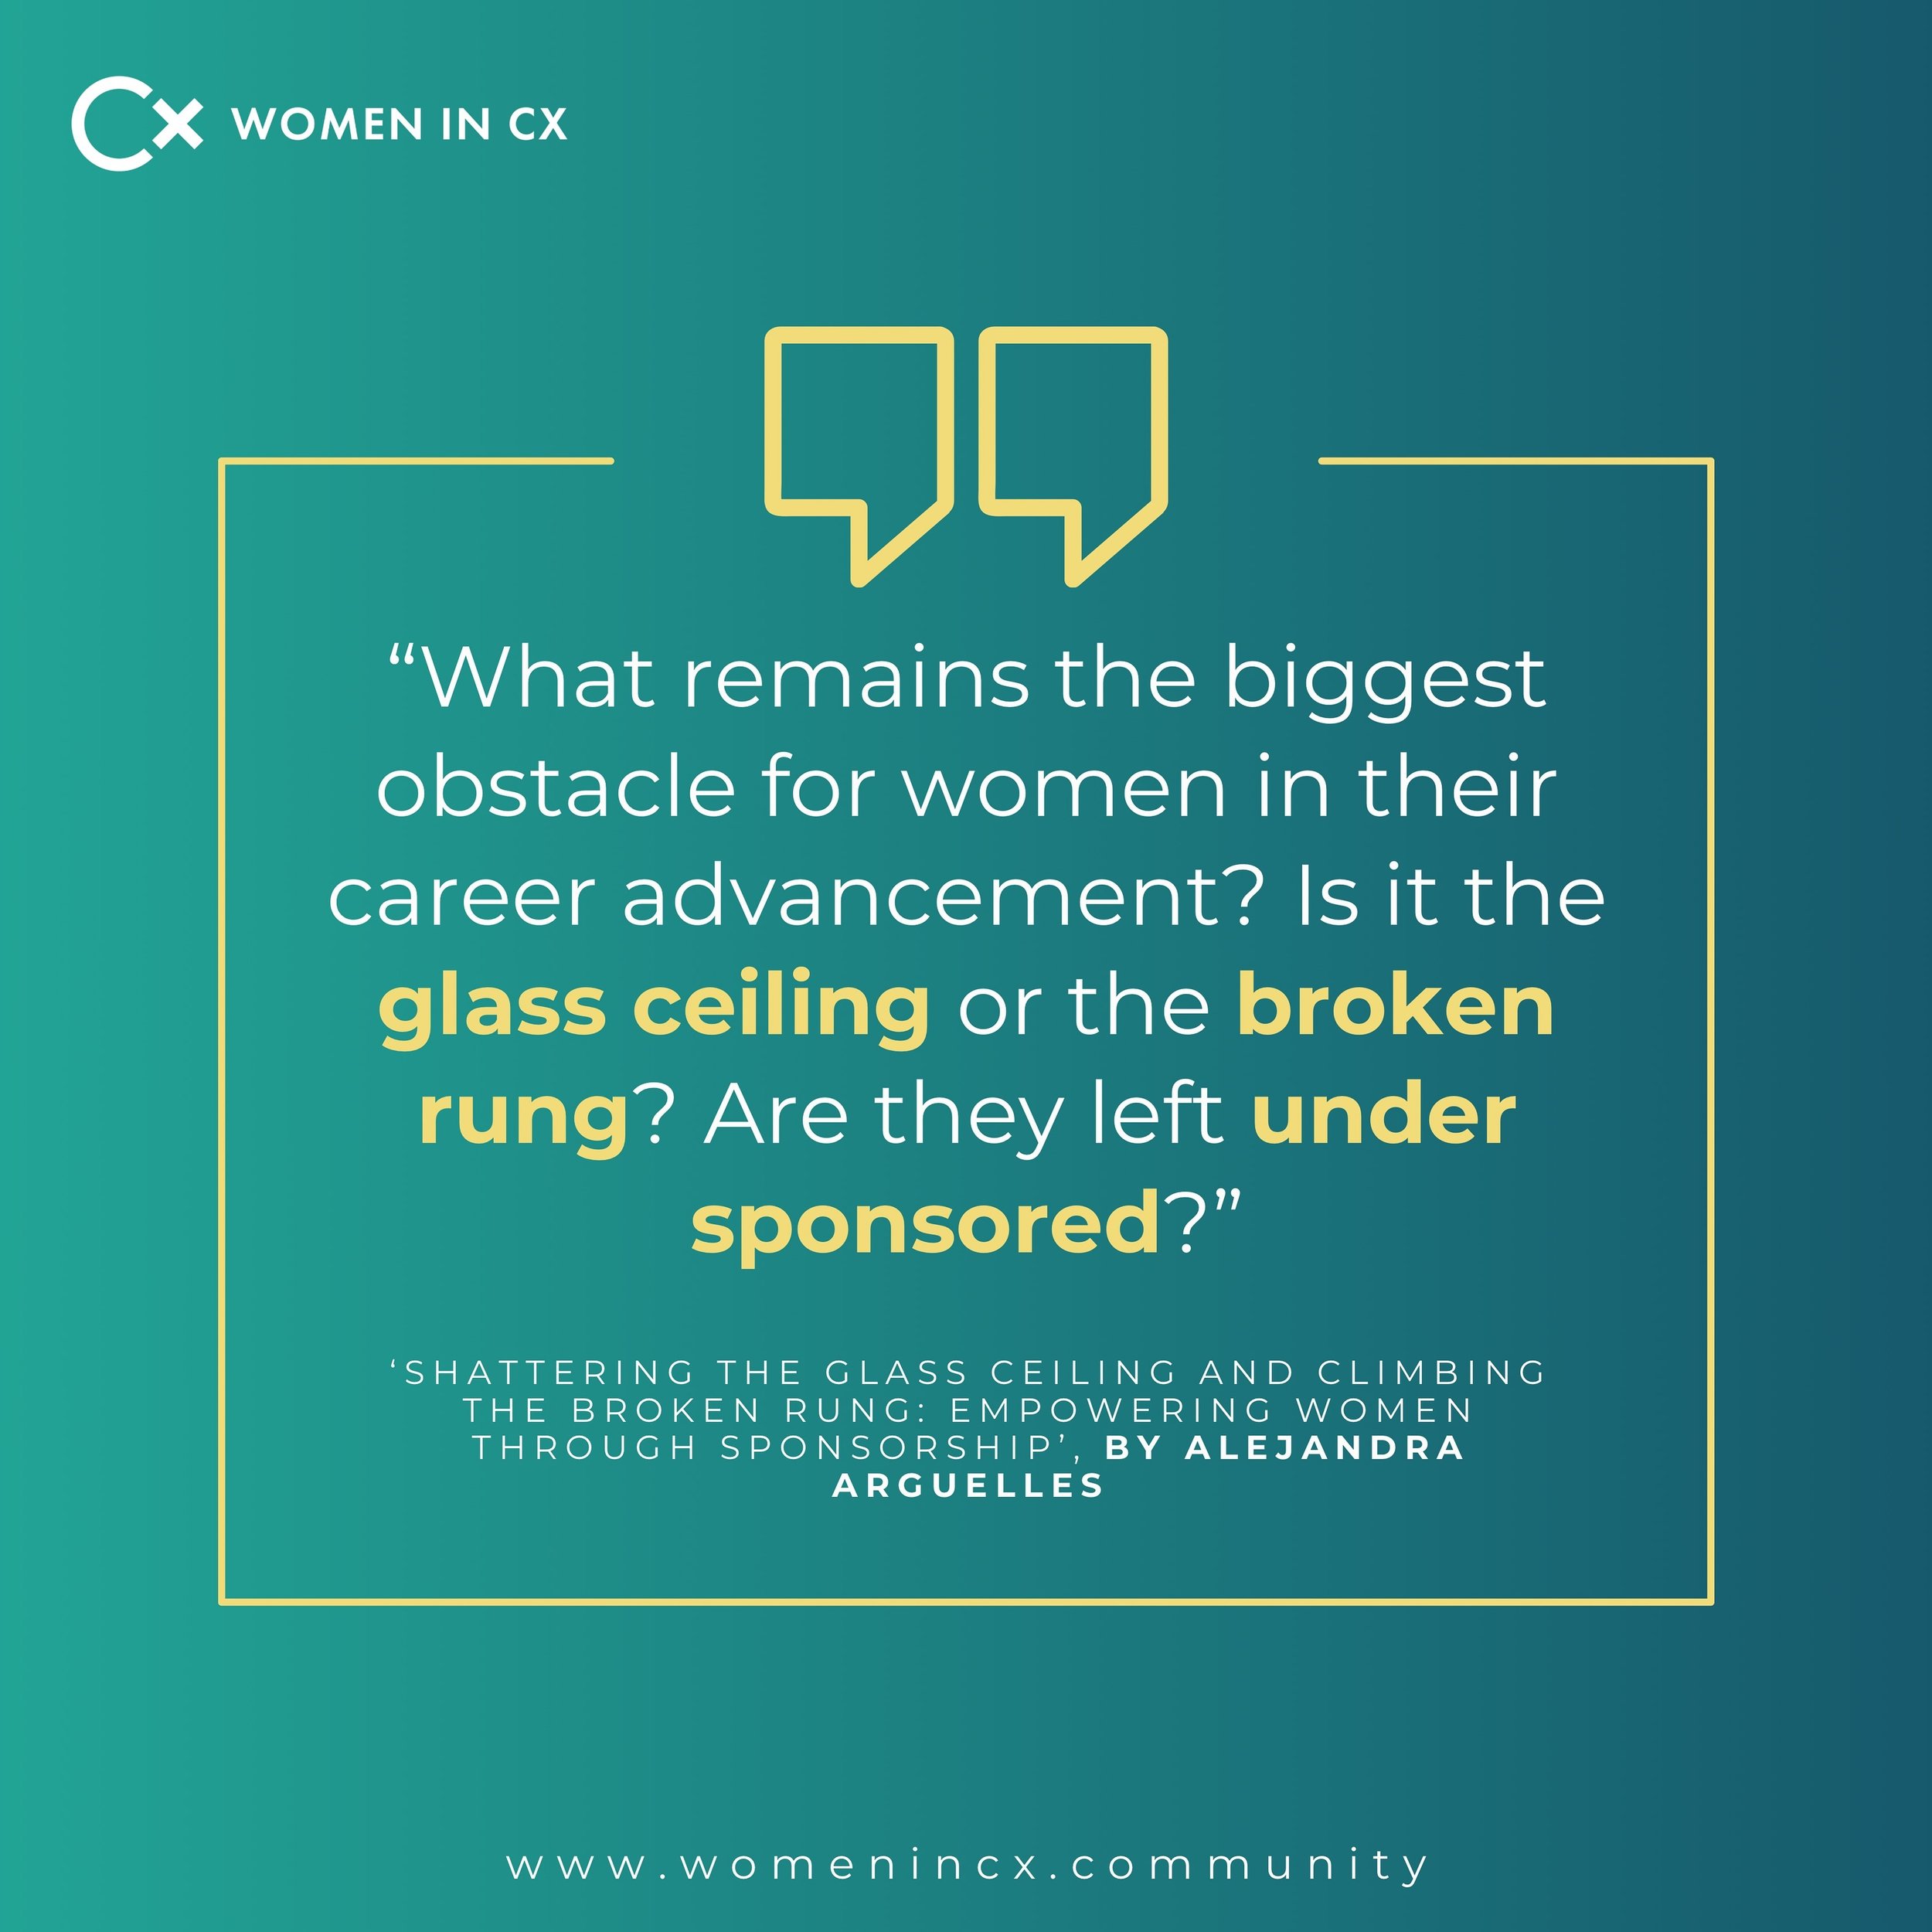 What remains the biggest obstacle for women in their career advancement? 🚧
&nbsp;
In our latest article, &lsquo;Shattering the Glass Ceiling and Climbing the Broken Rung: Empowering Women Through Sponsorship&rsquo;, Alejandra Arguelles, Director - C